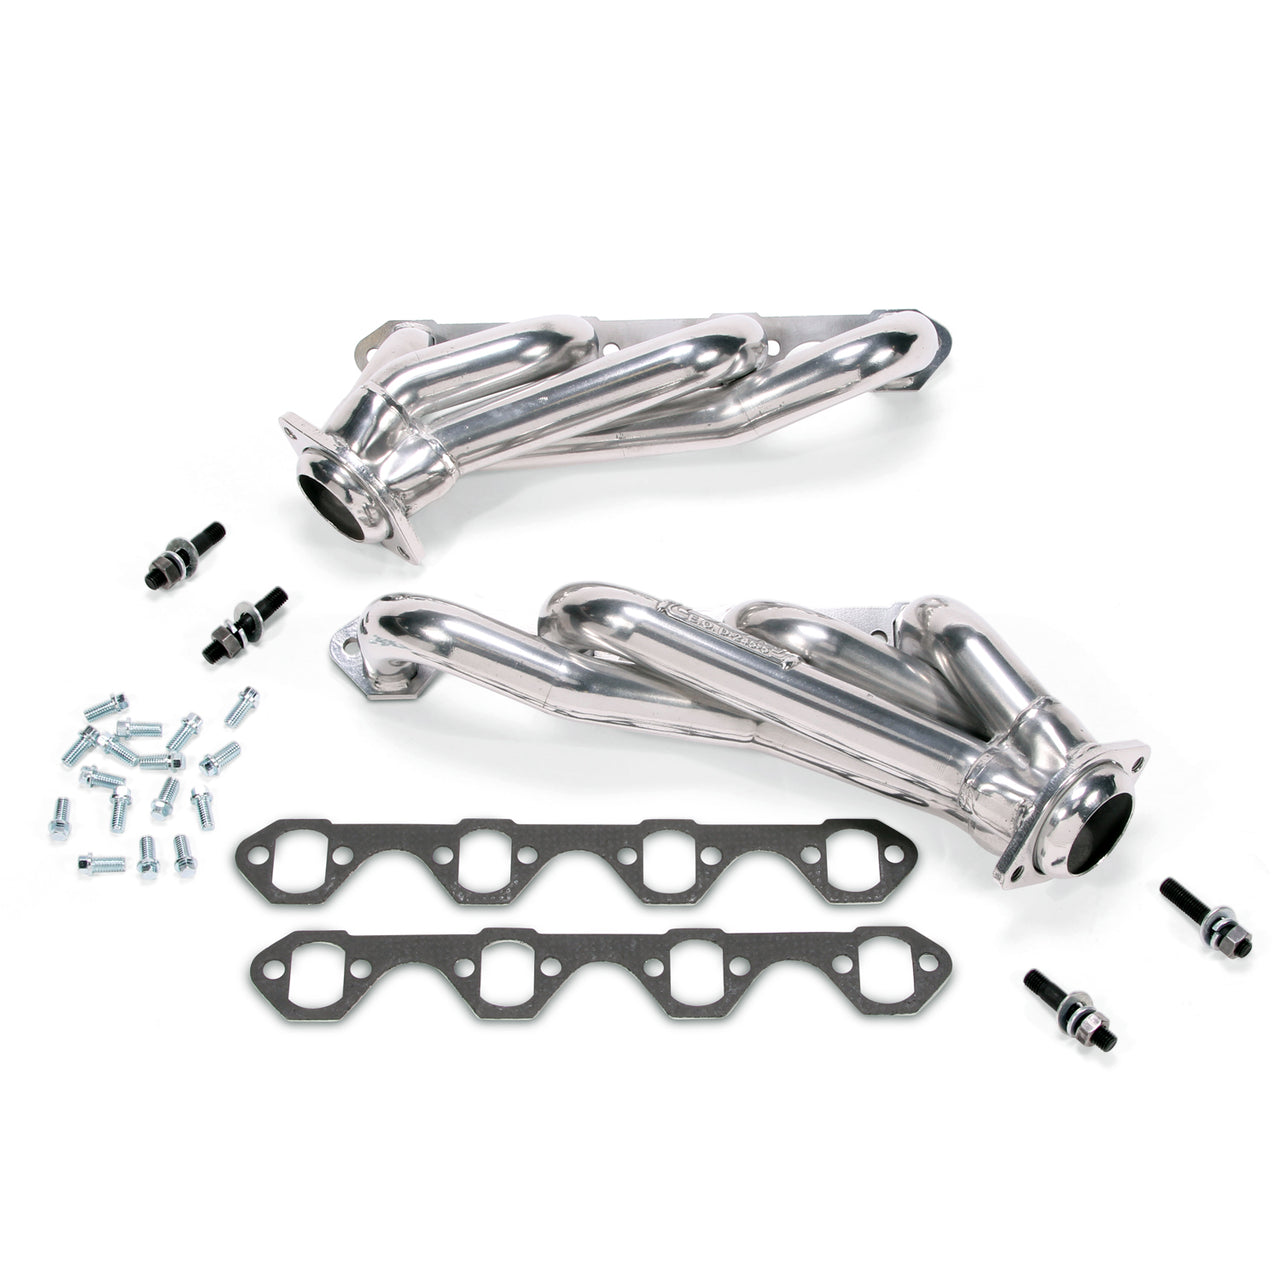 1979-1993 MUSTANG 351 SWAP 1-5/8 SHORTY HEADERS (POLISHED SILVER CERAMIC)